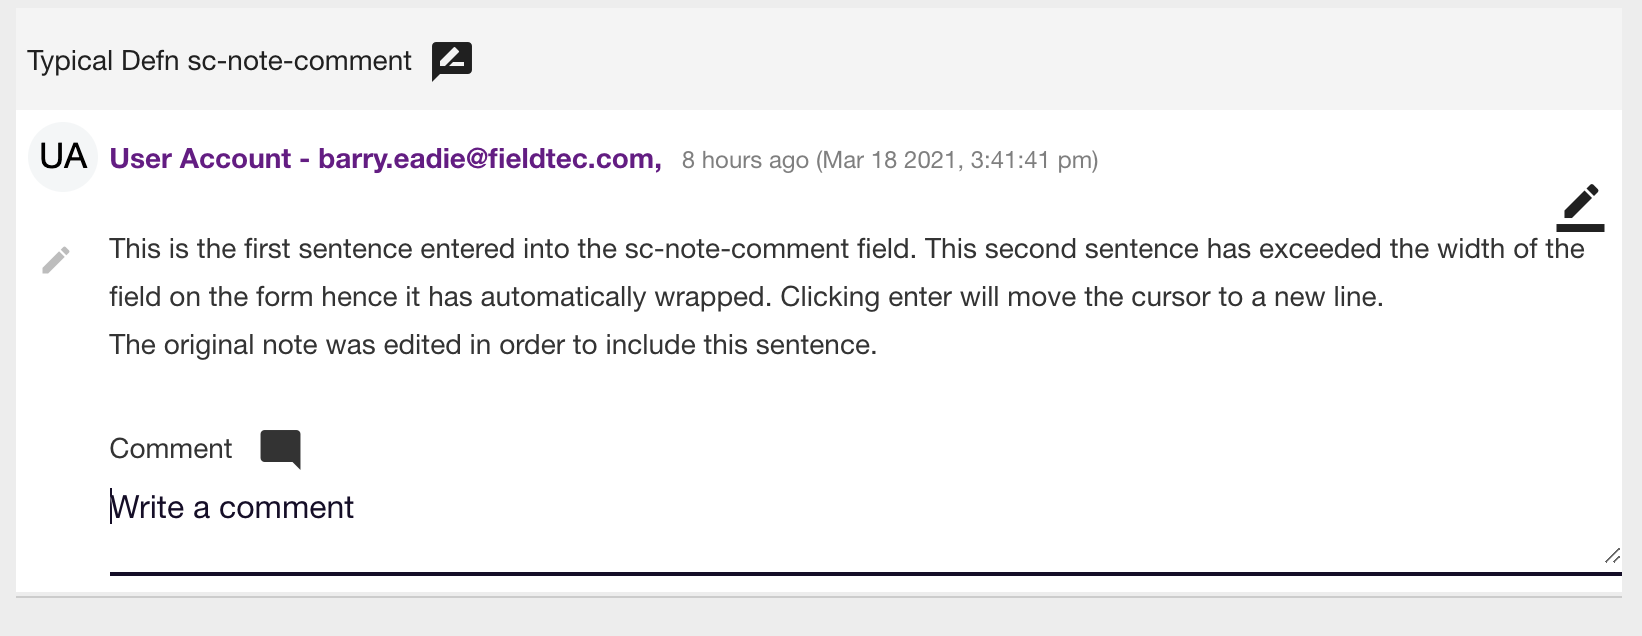 sc-note-comment-field-Example-3-Image-1